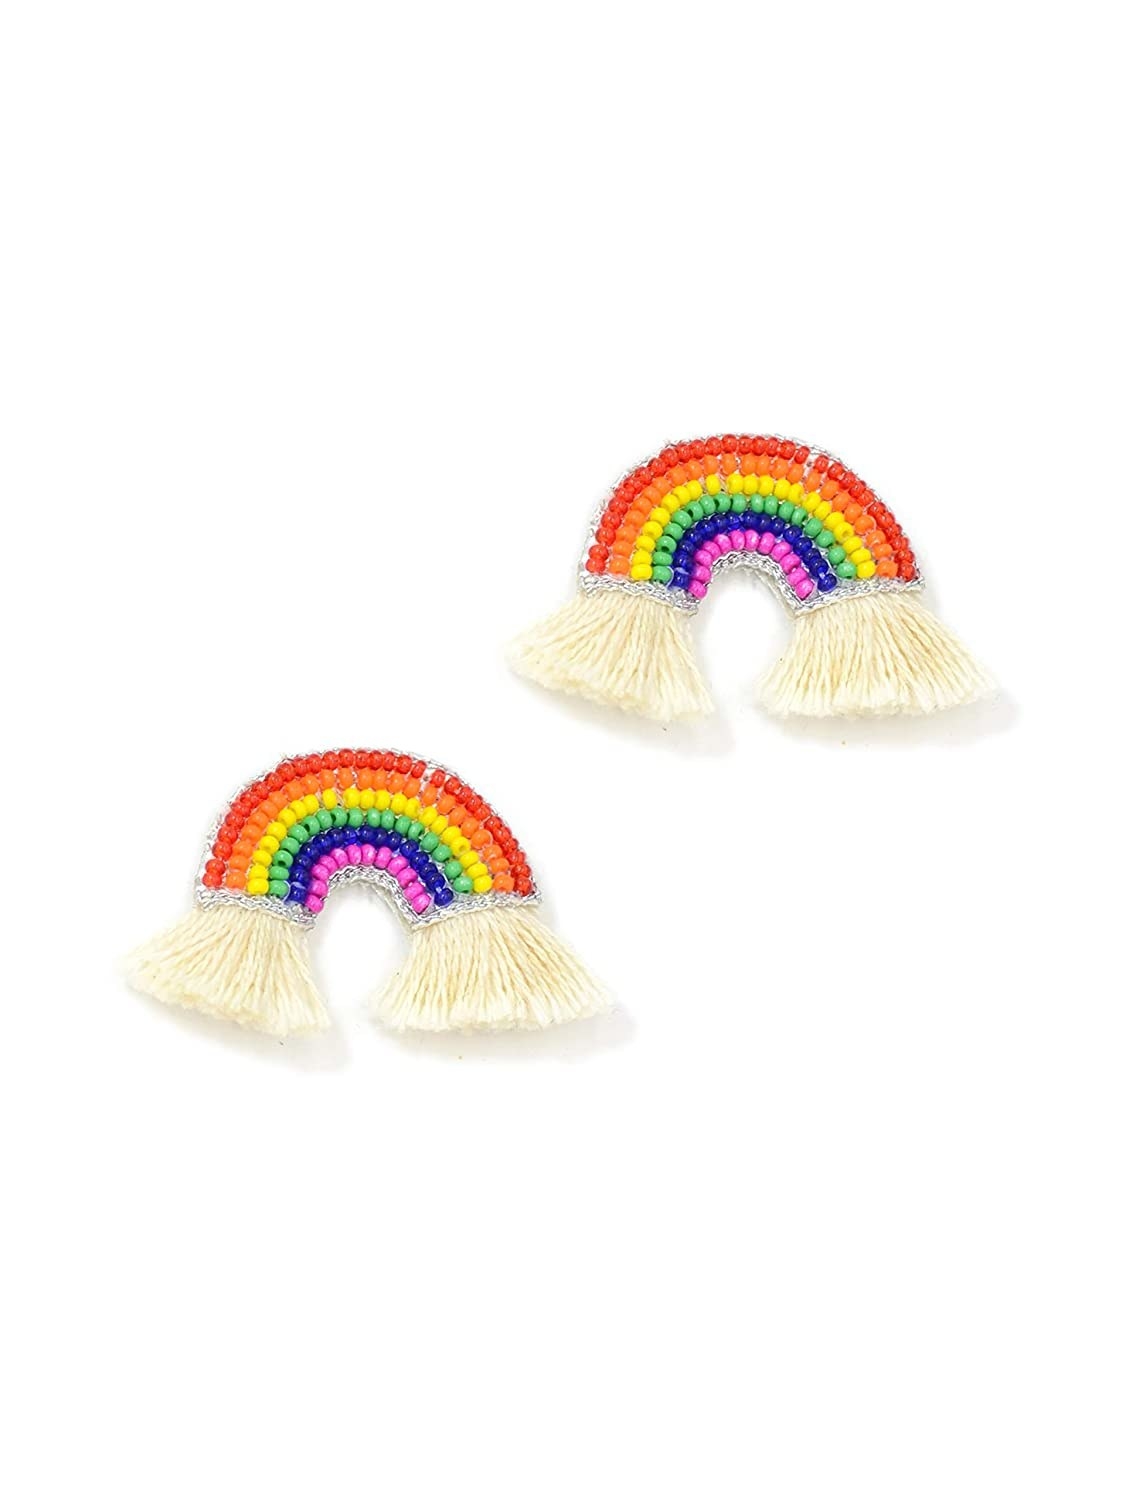 Handcrafted rainbow bead earrings with a fringe at the bottom.